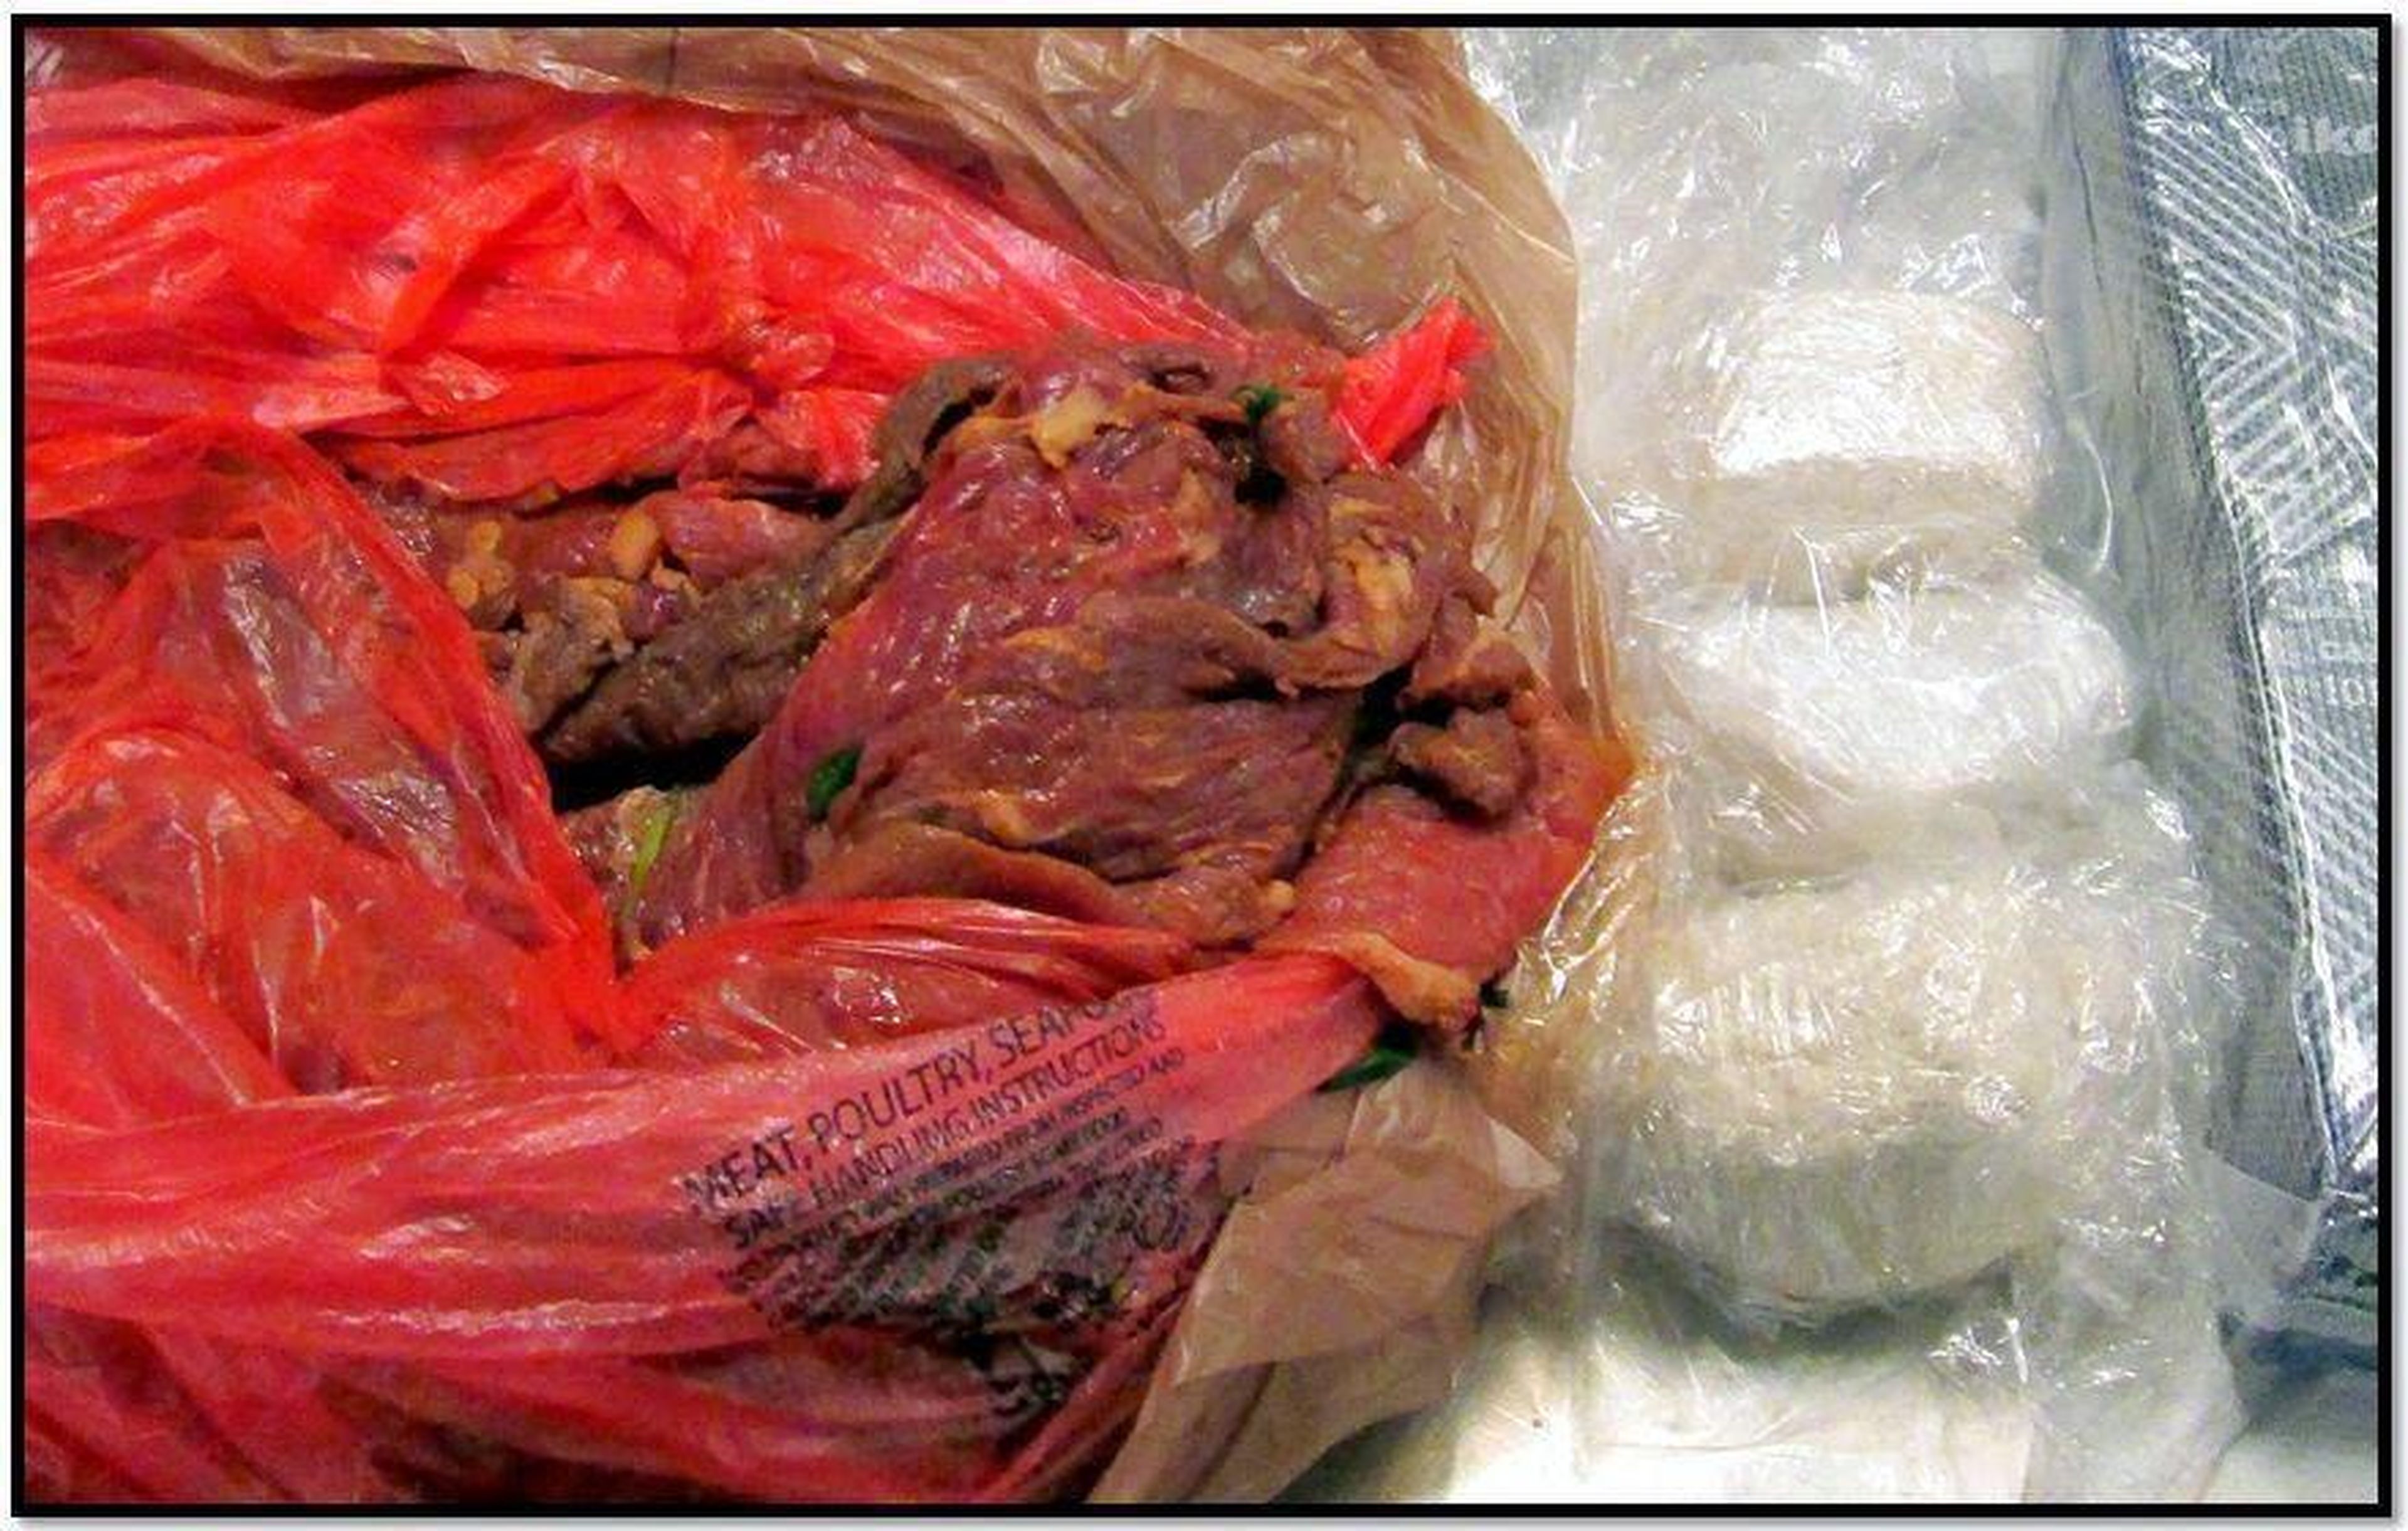 18. Three pounds of cocaine stuffed in meat